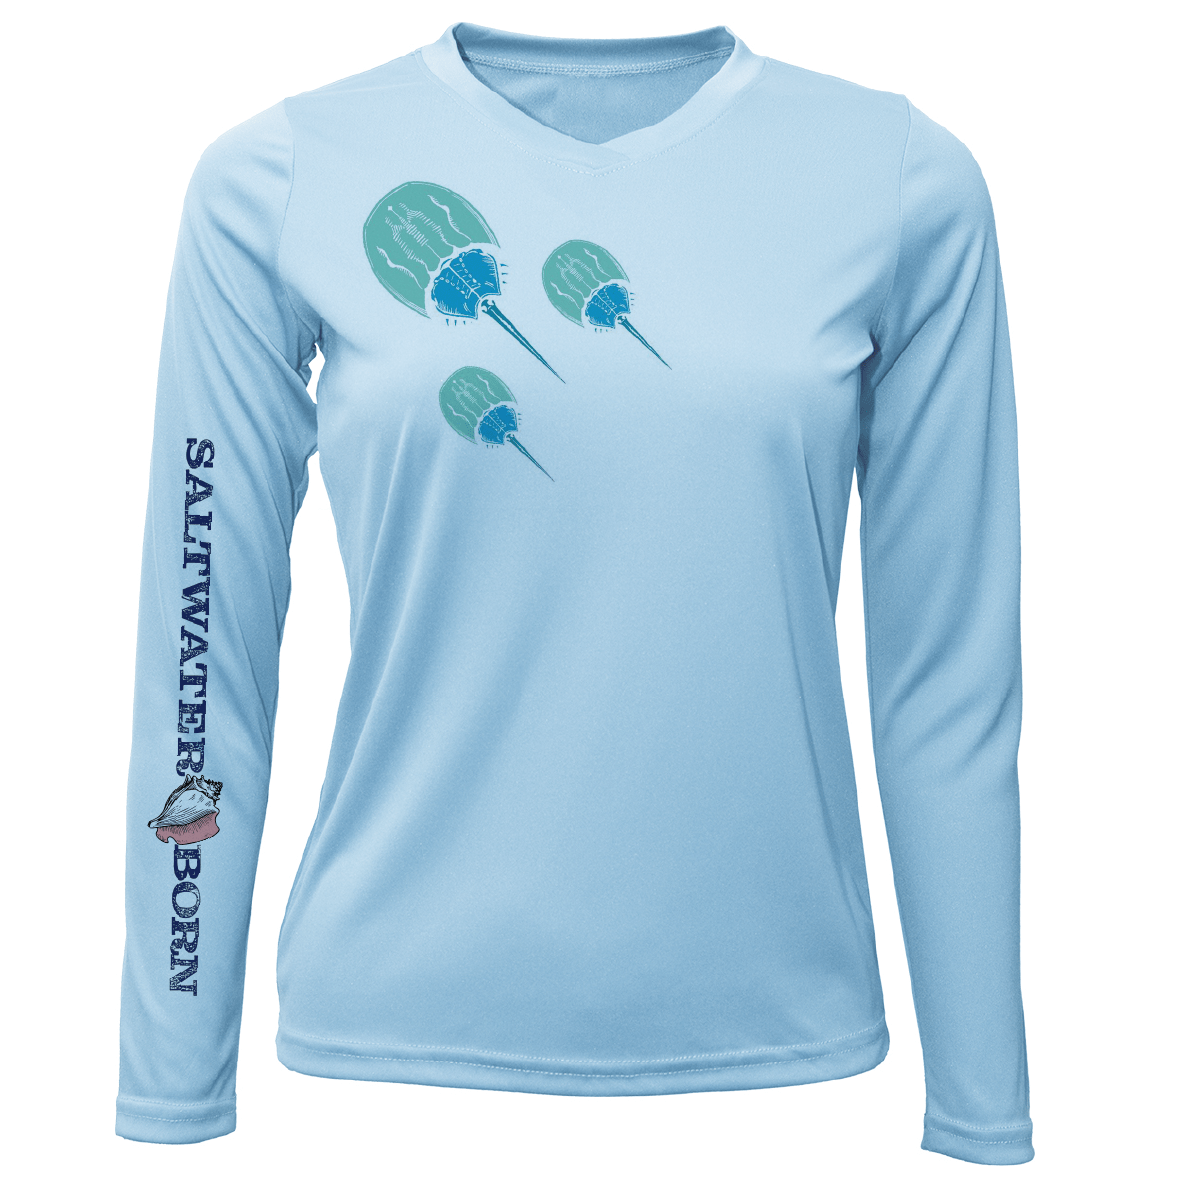 Key West Horseshoe Crab Women's Long Sleeve UPF 50+ Dry-Fit Shirt in White | Size Small